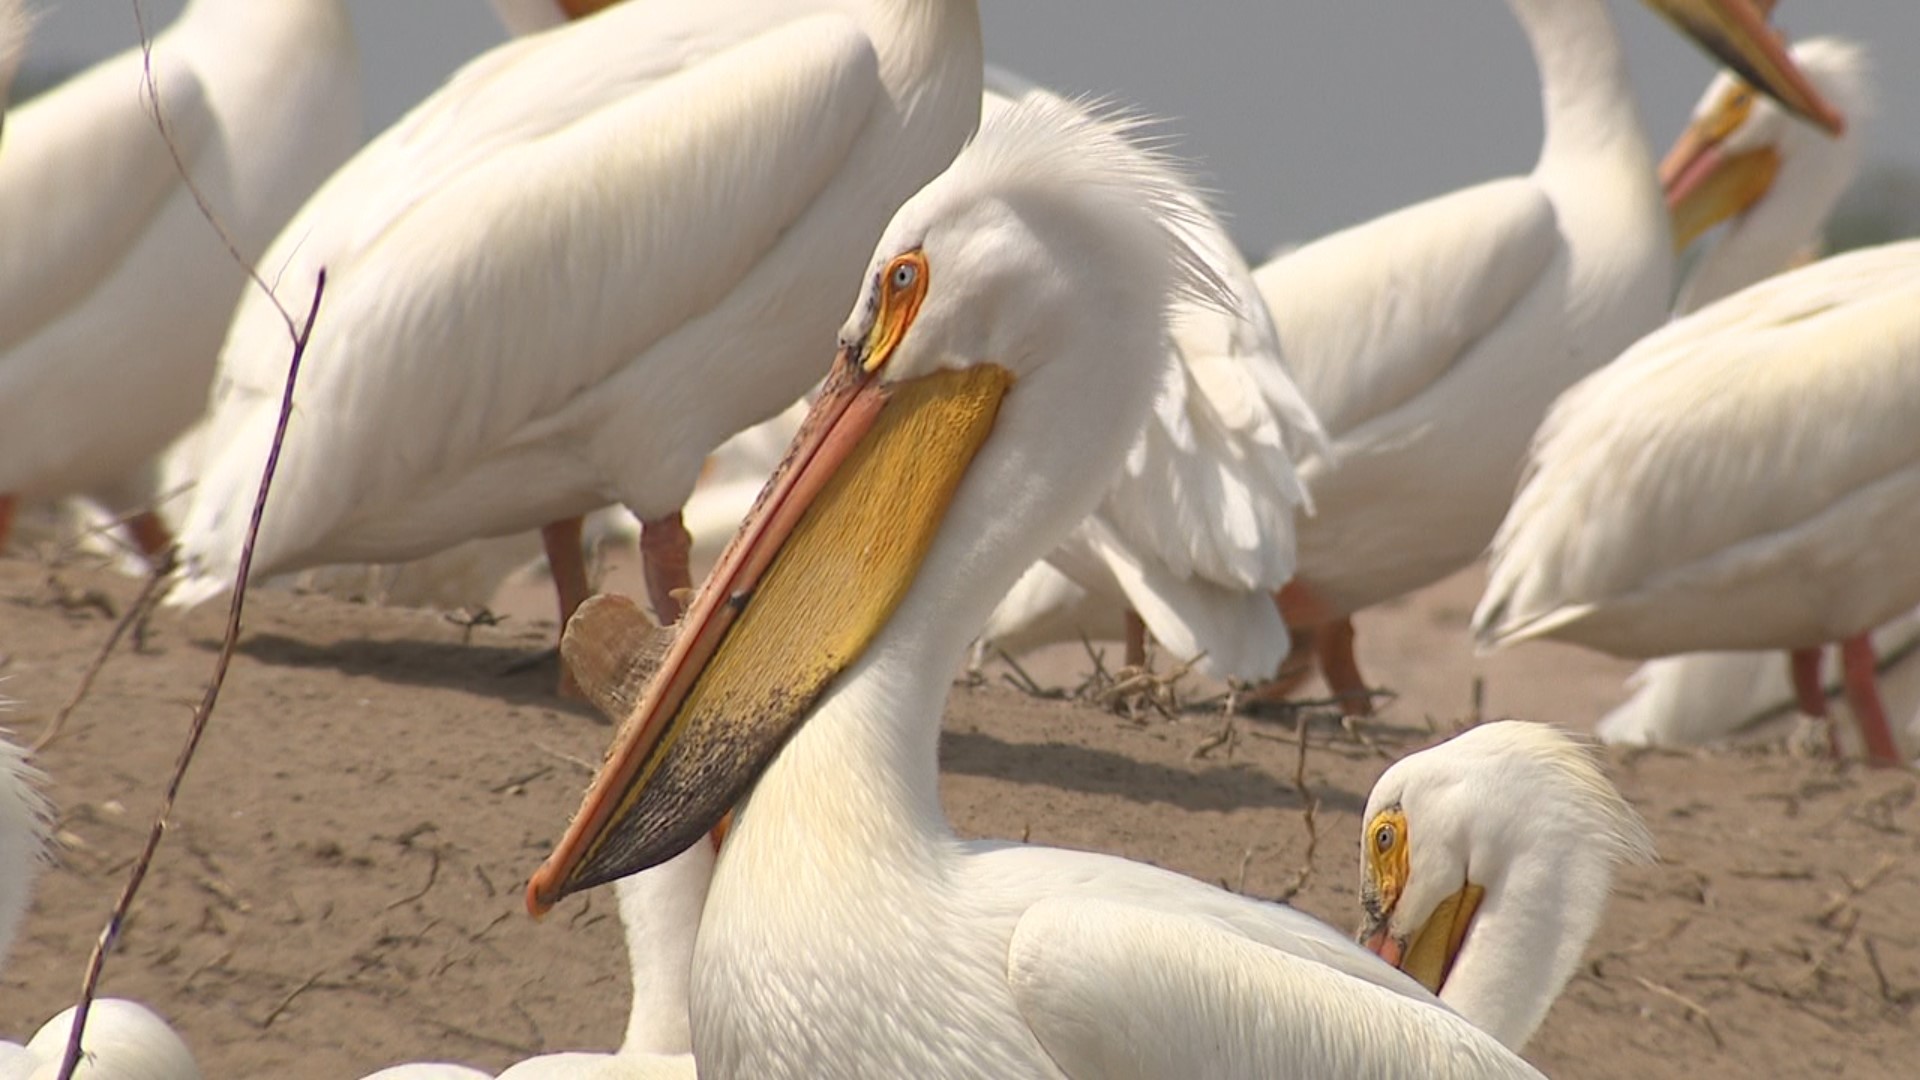 It's the only documented location of pelicans nesting on the upper half of the Mississippi River. However, the sandy islands they nest on are quickly disappearing.